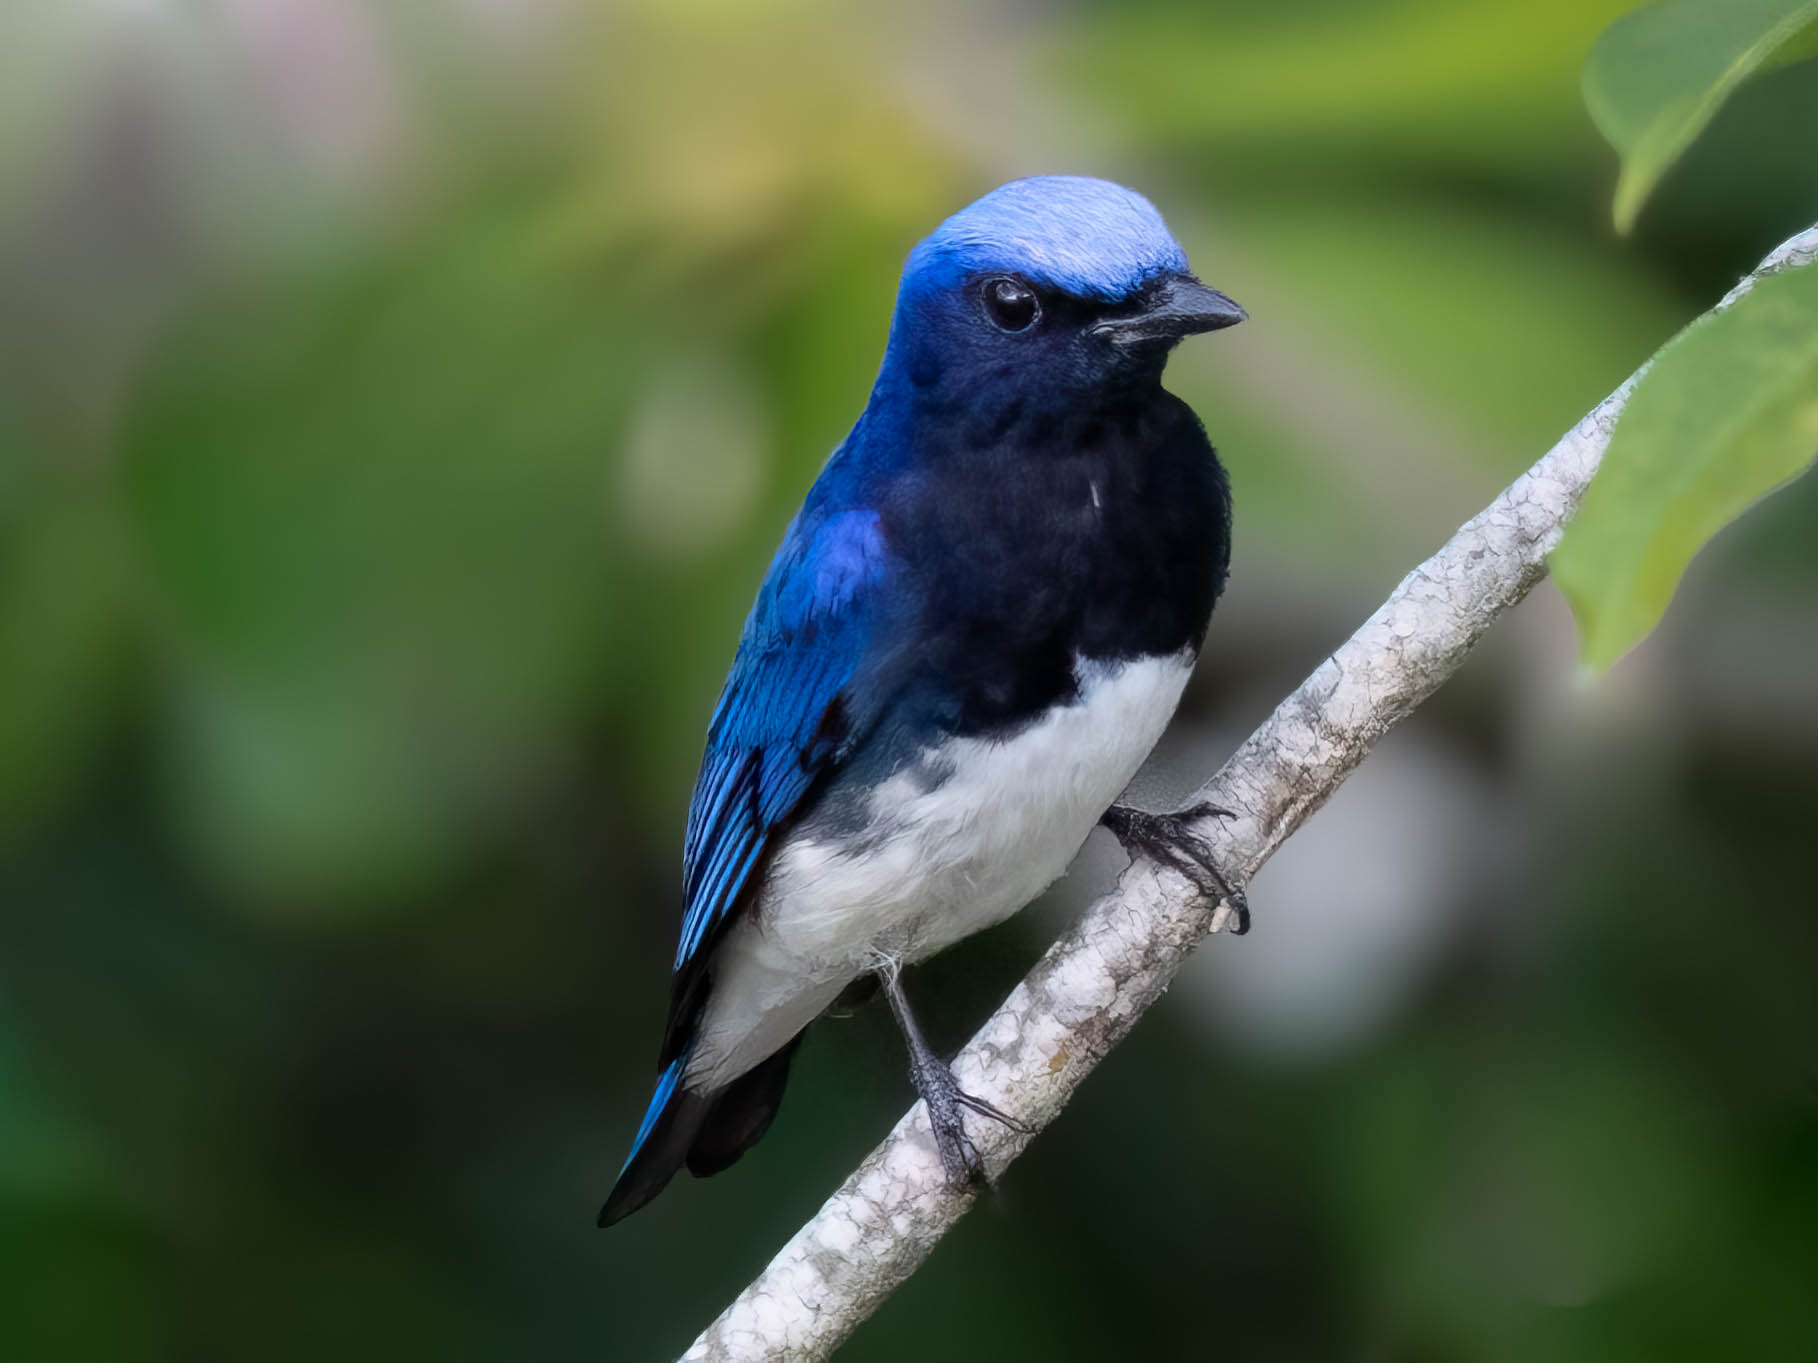 Blue-and-white Flycatcher at Pasir Ris Park on 20 Mar 2023. Photo credit: William Chong